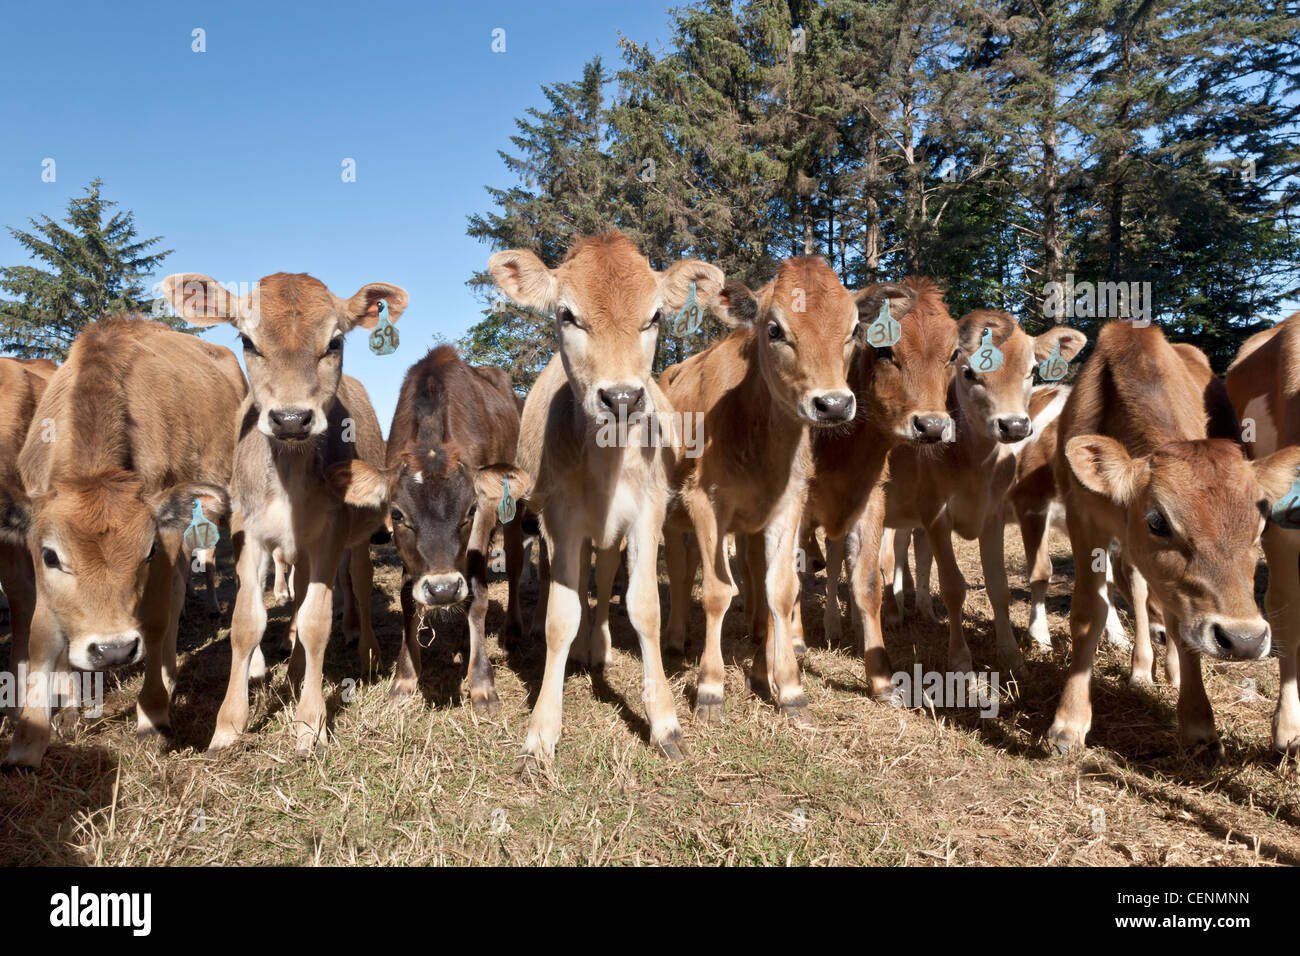 Weaned curious Jersey calves at dairy. Stock Photo